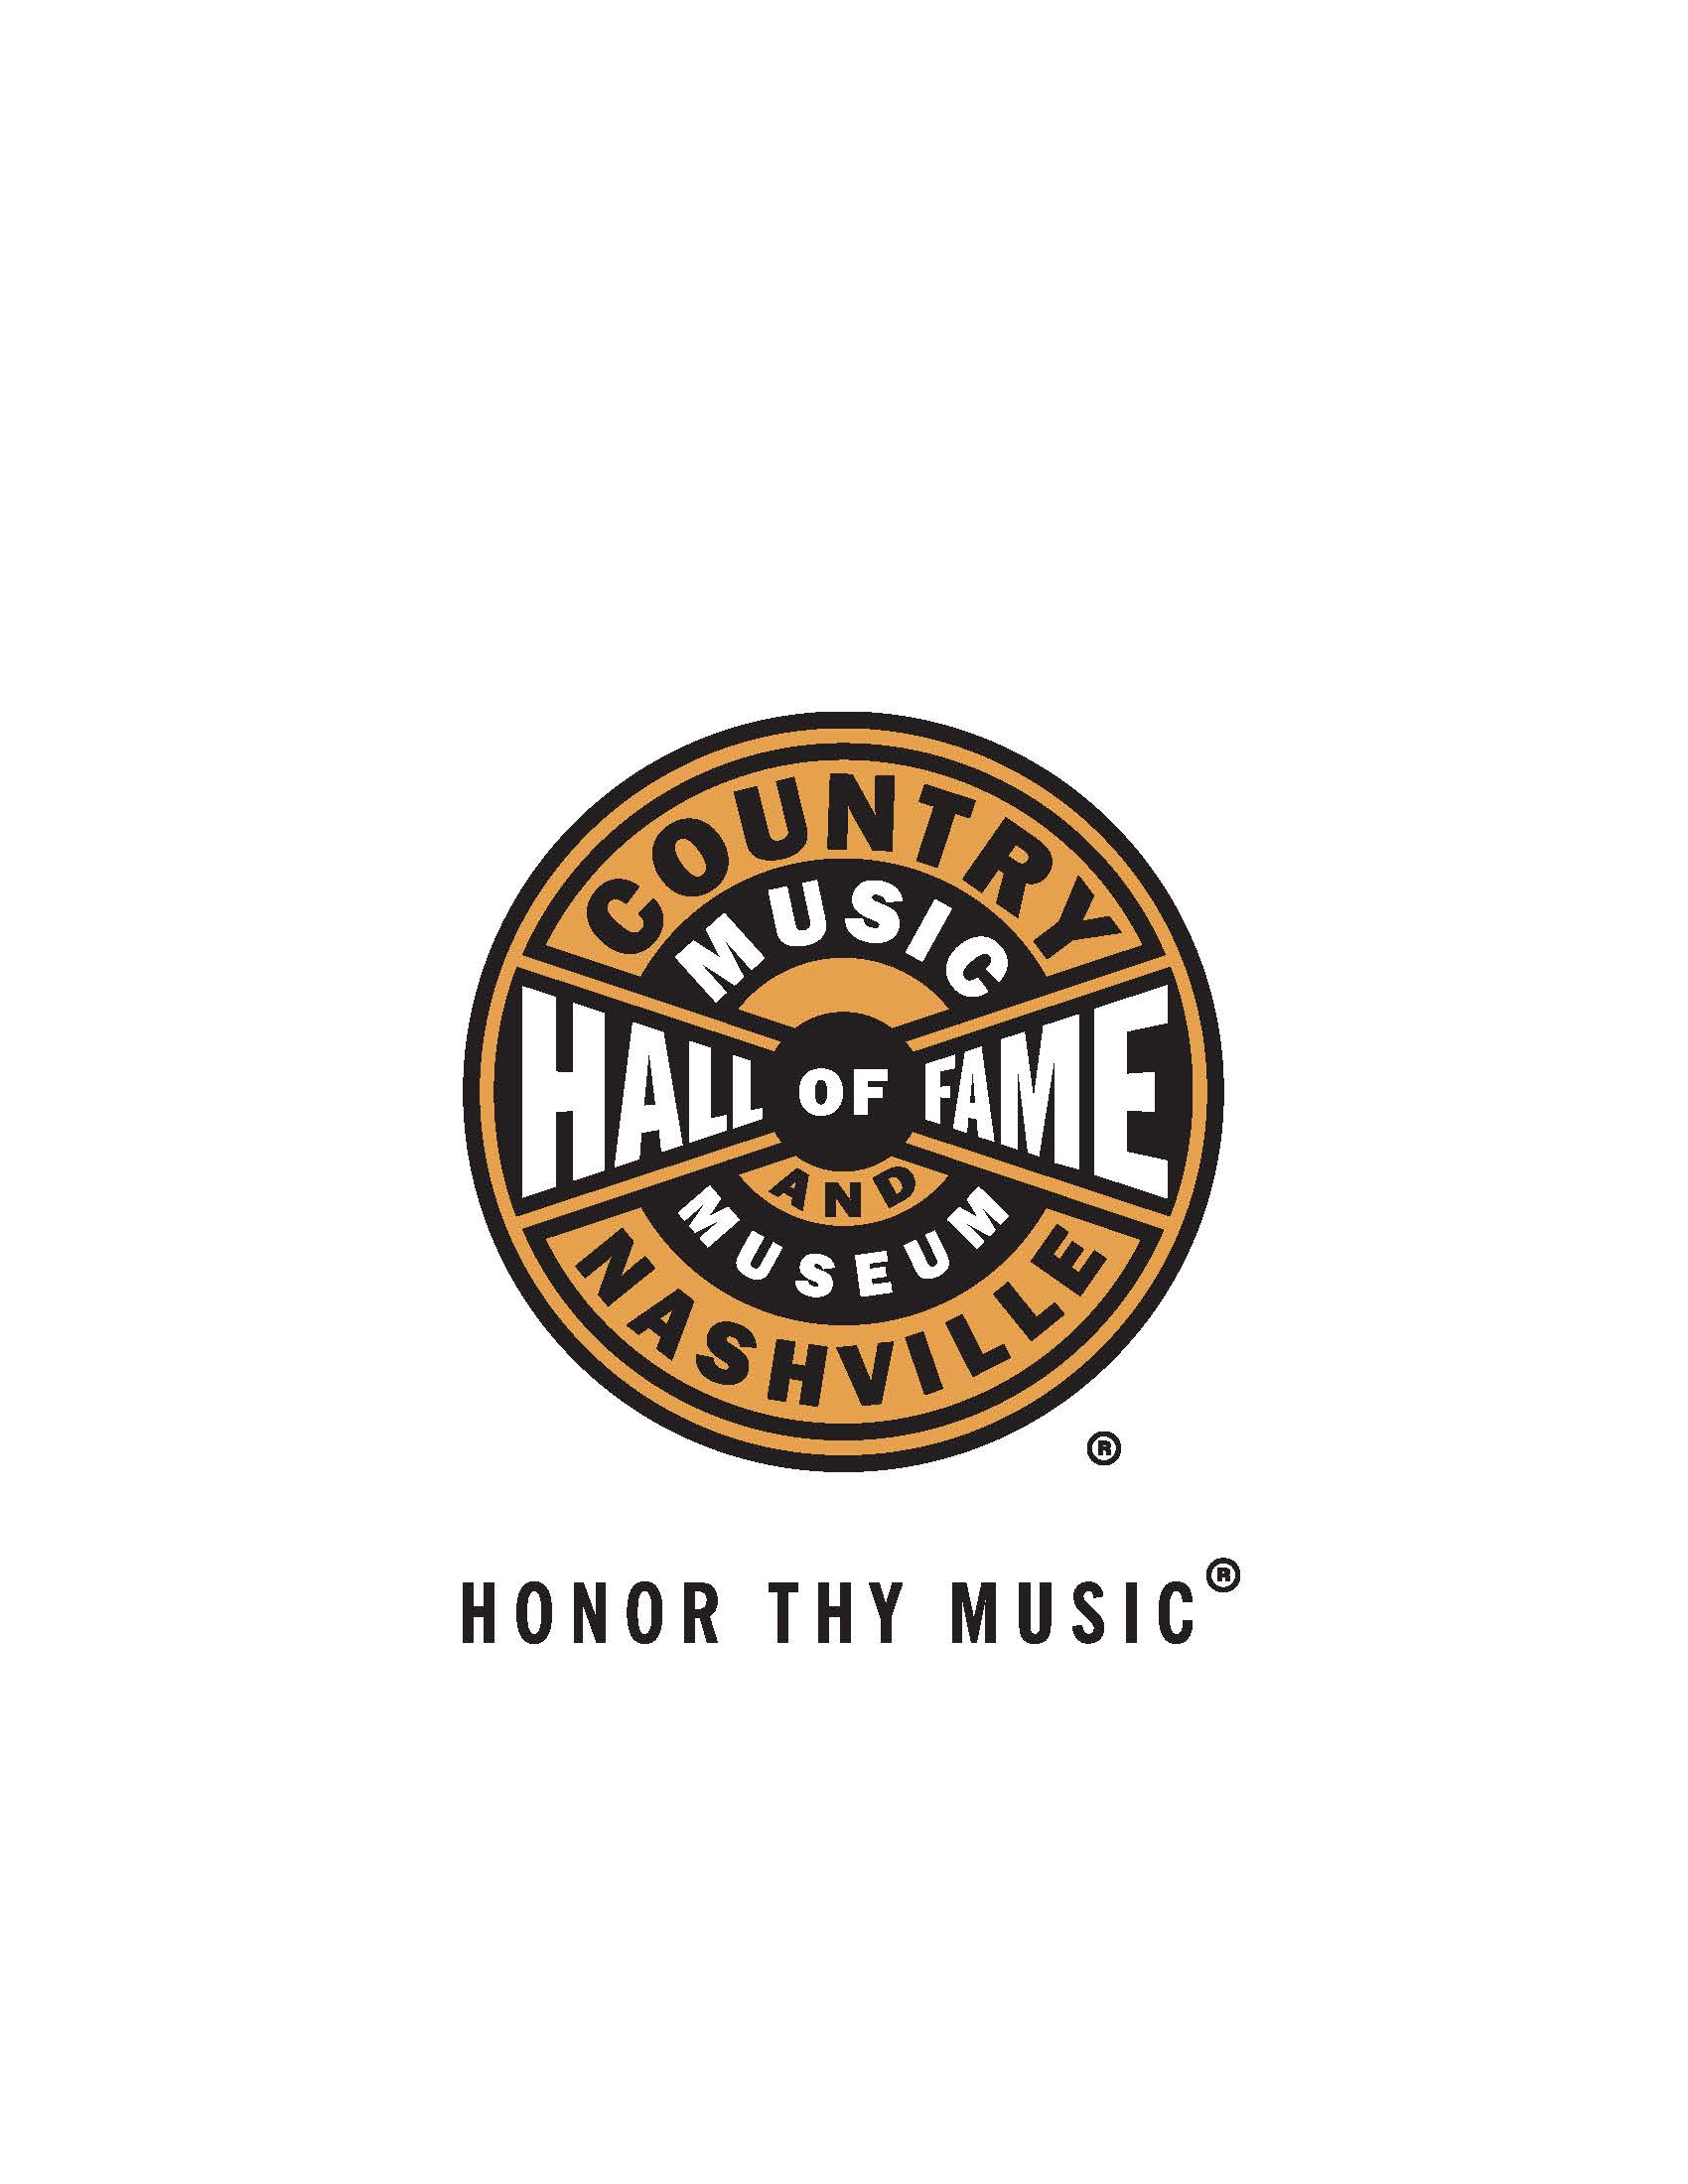 Country Music Hall of Fame and Museum Arts Education